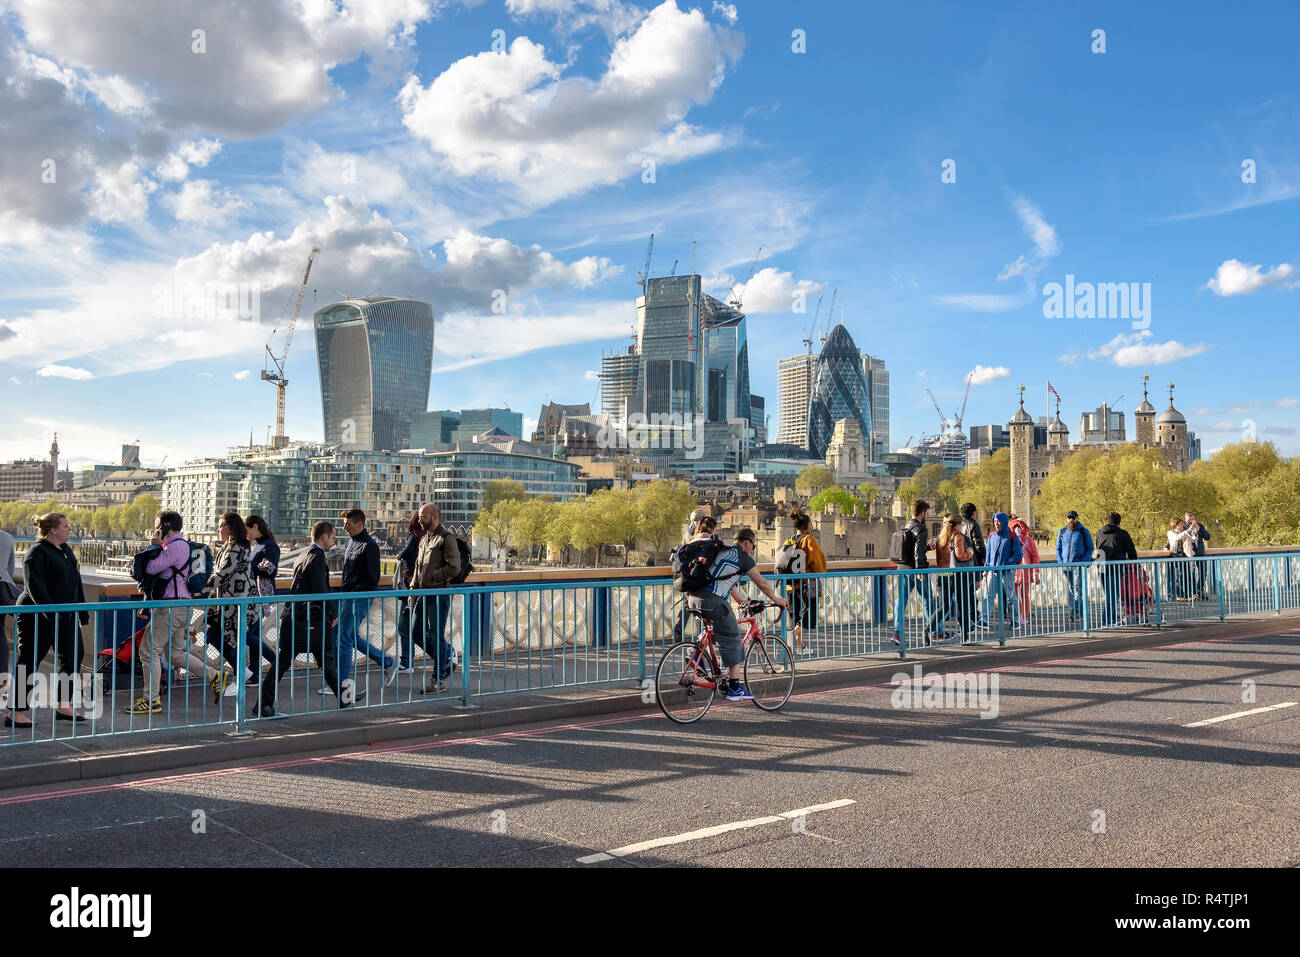 London, UK - April 26, 2018: People cross the Tower Bridge with skyline of London City in the background Stock Photo